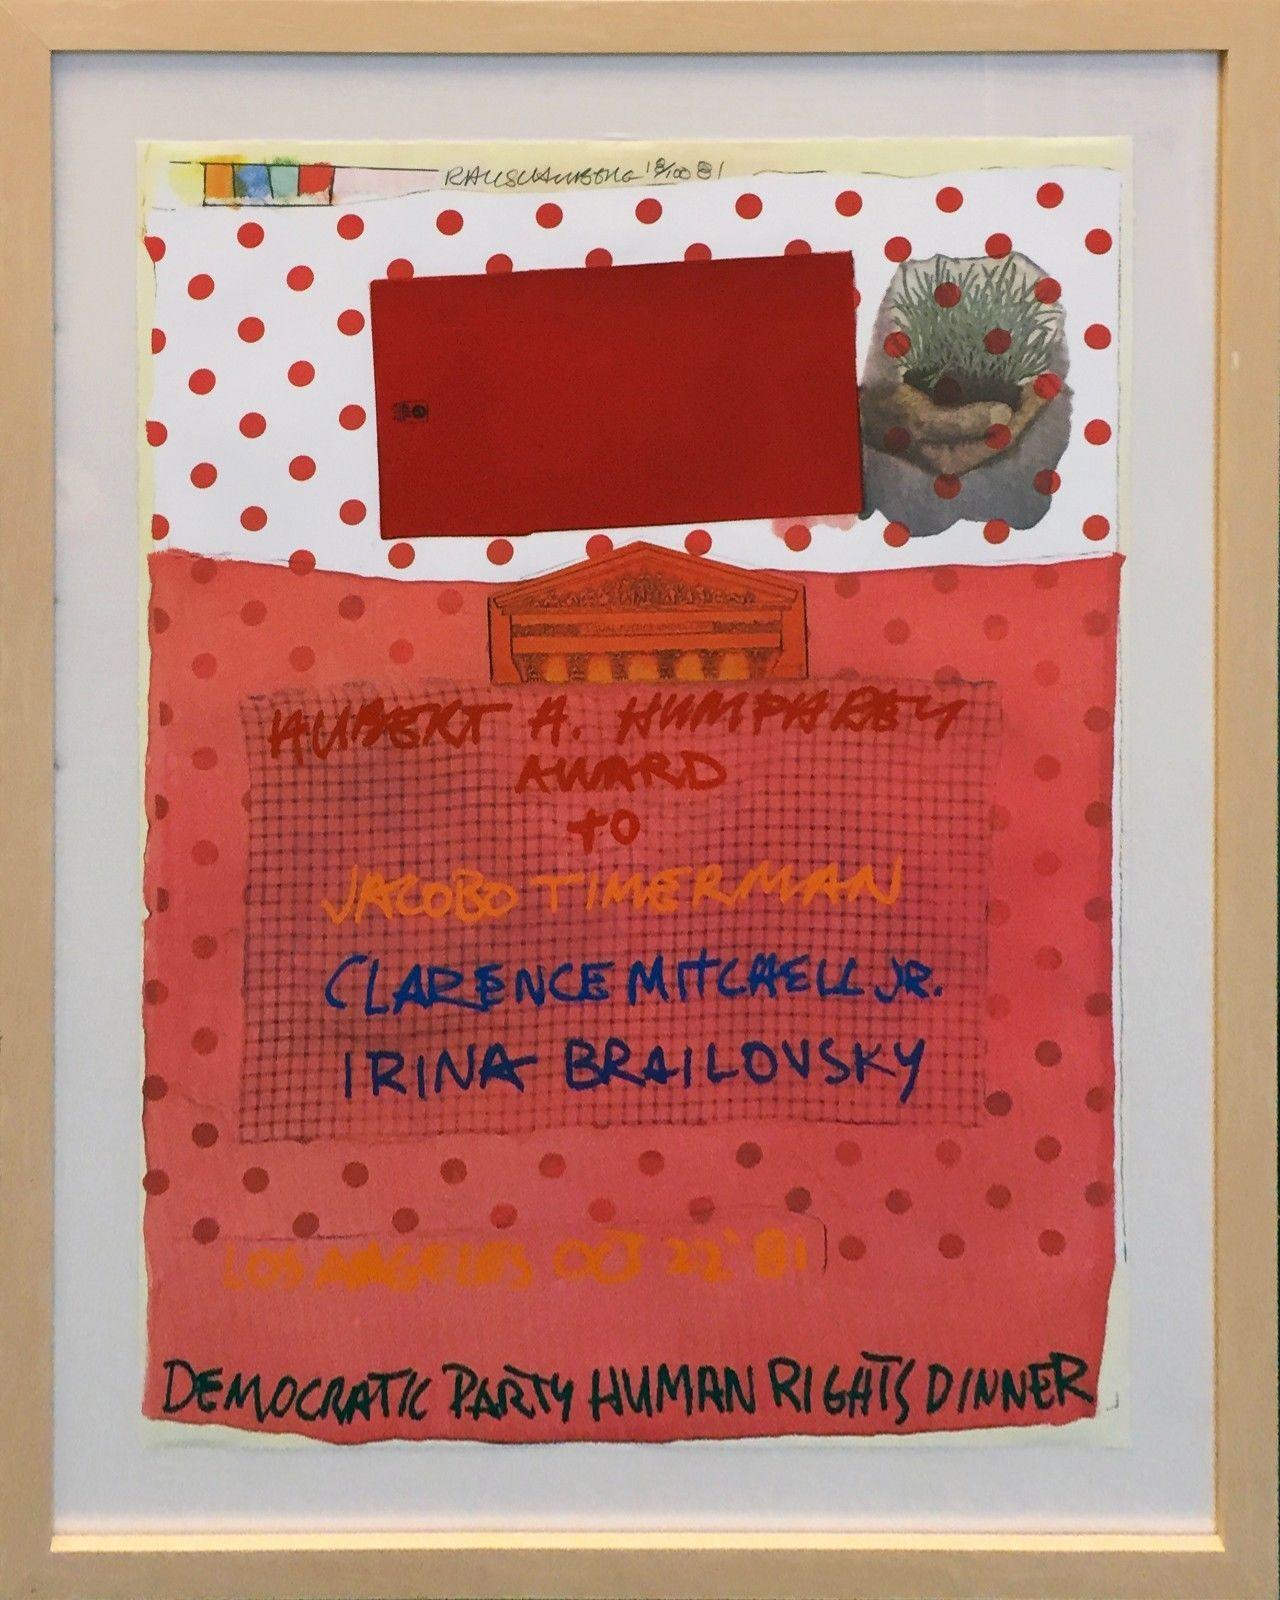 DEMOCRATIC PARTY HUMAN RIGHTS DINNER - Print by Robert Rauschenberg